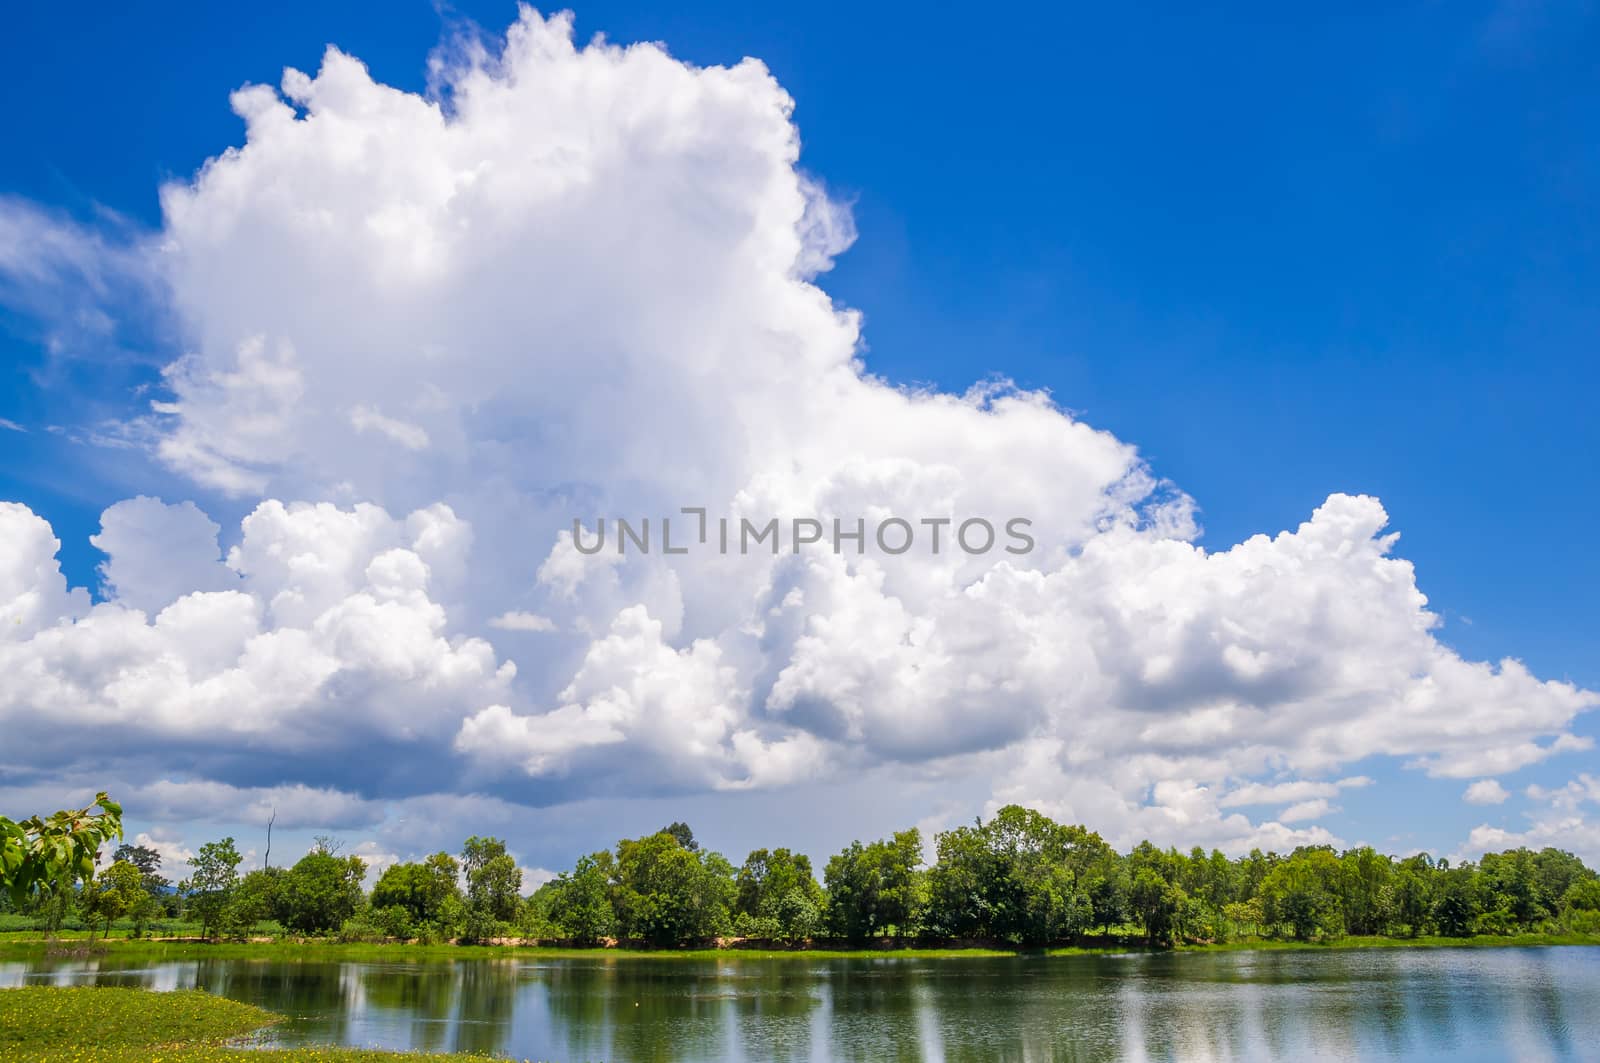 River with green meadows around and blue sky with cloudy.